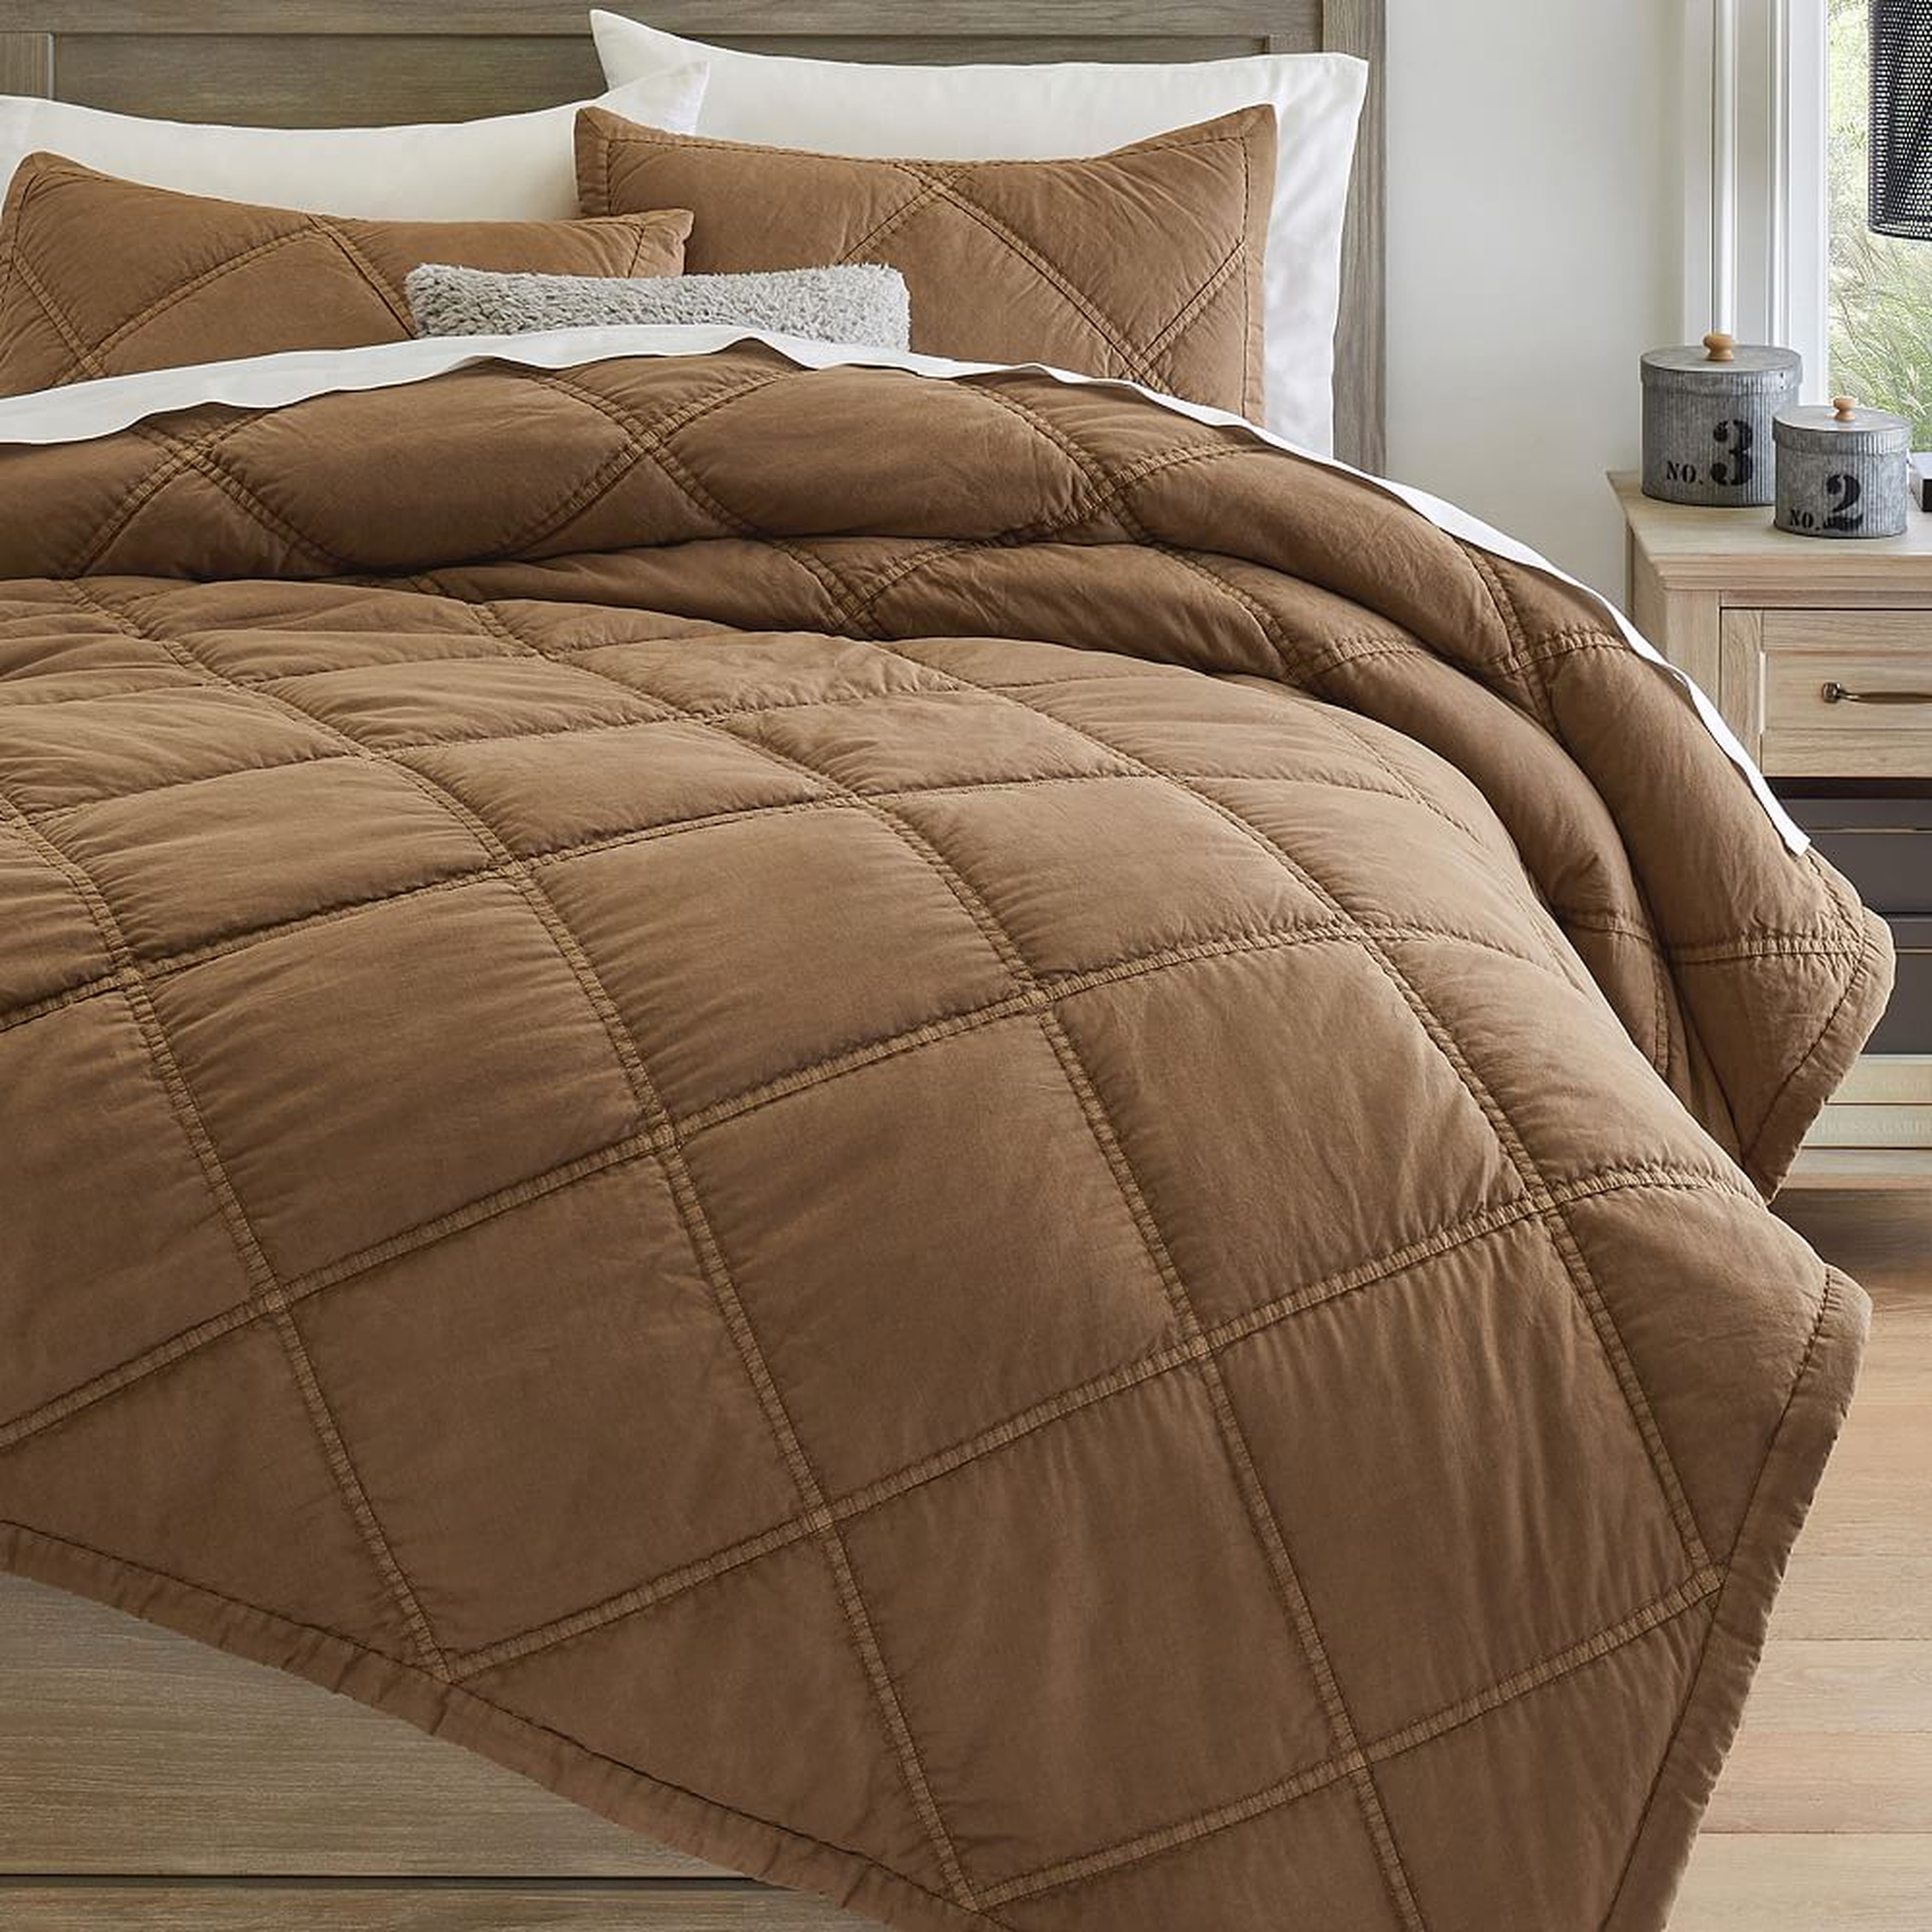 Washed Rapids Quilt, Full/Queen, Brown - Pottery Barn Teen